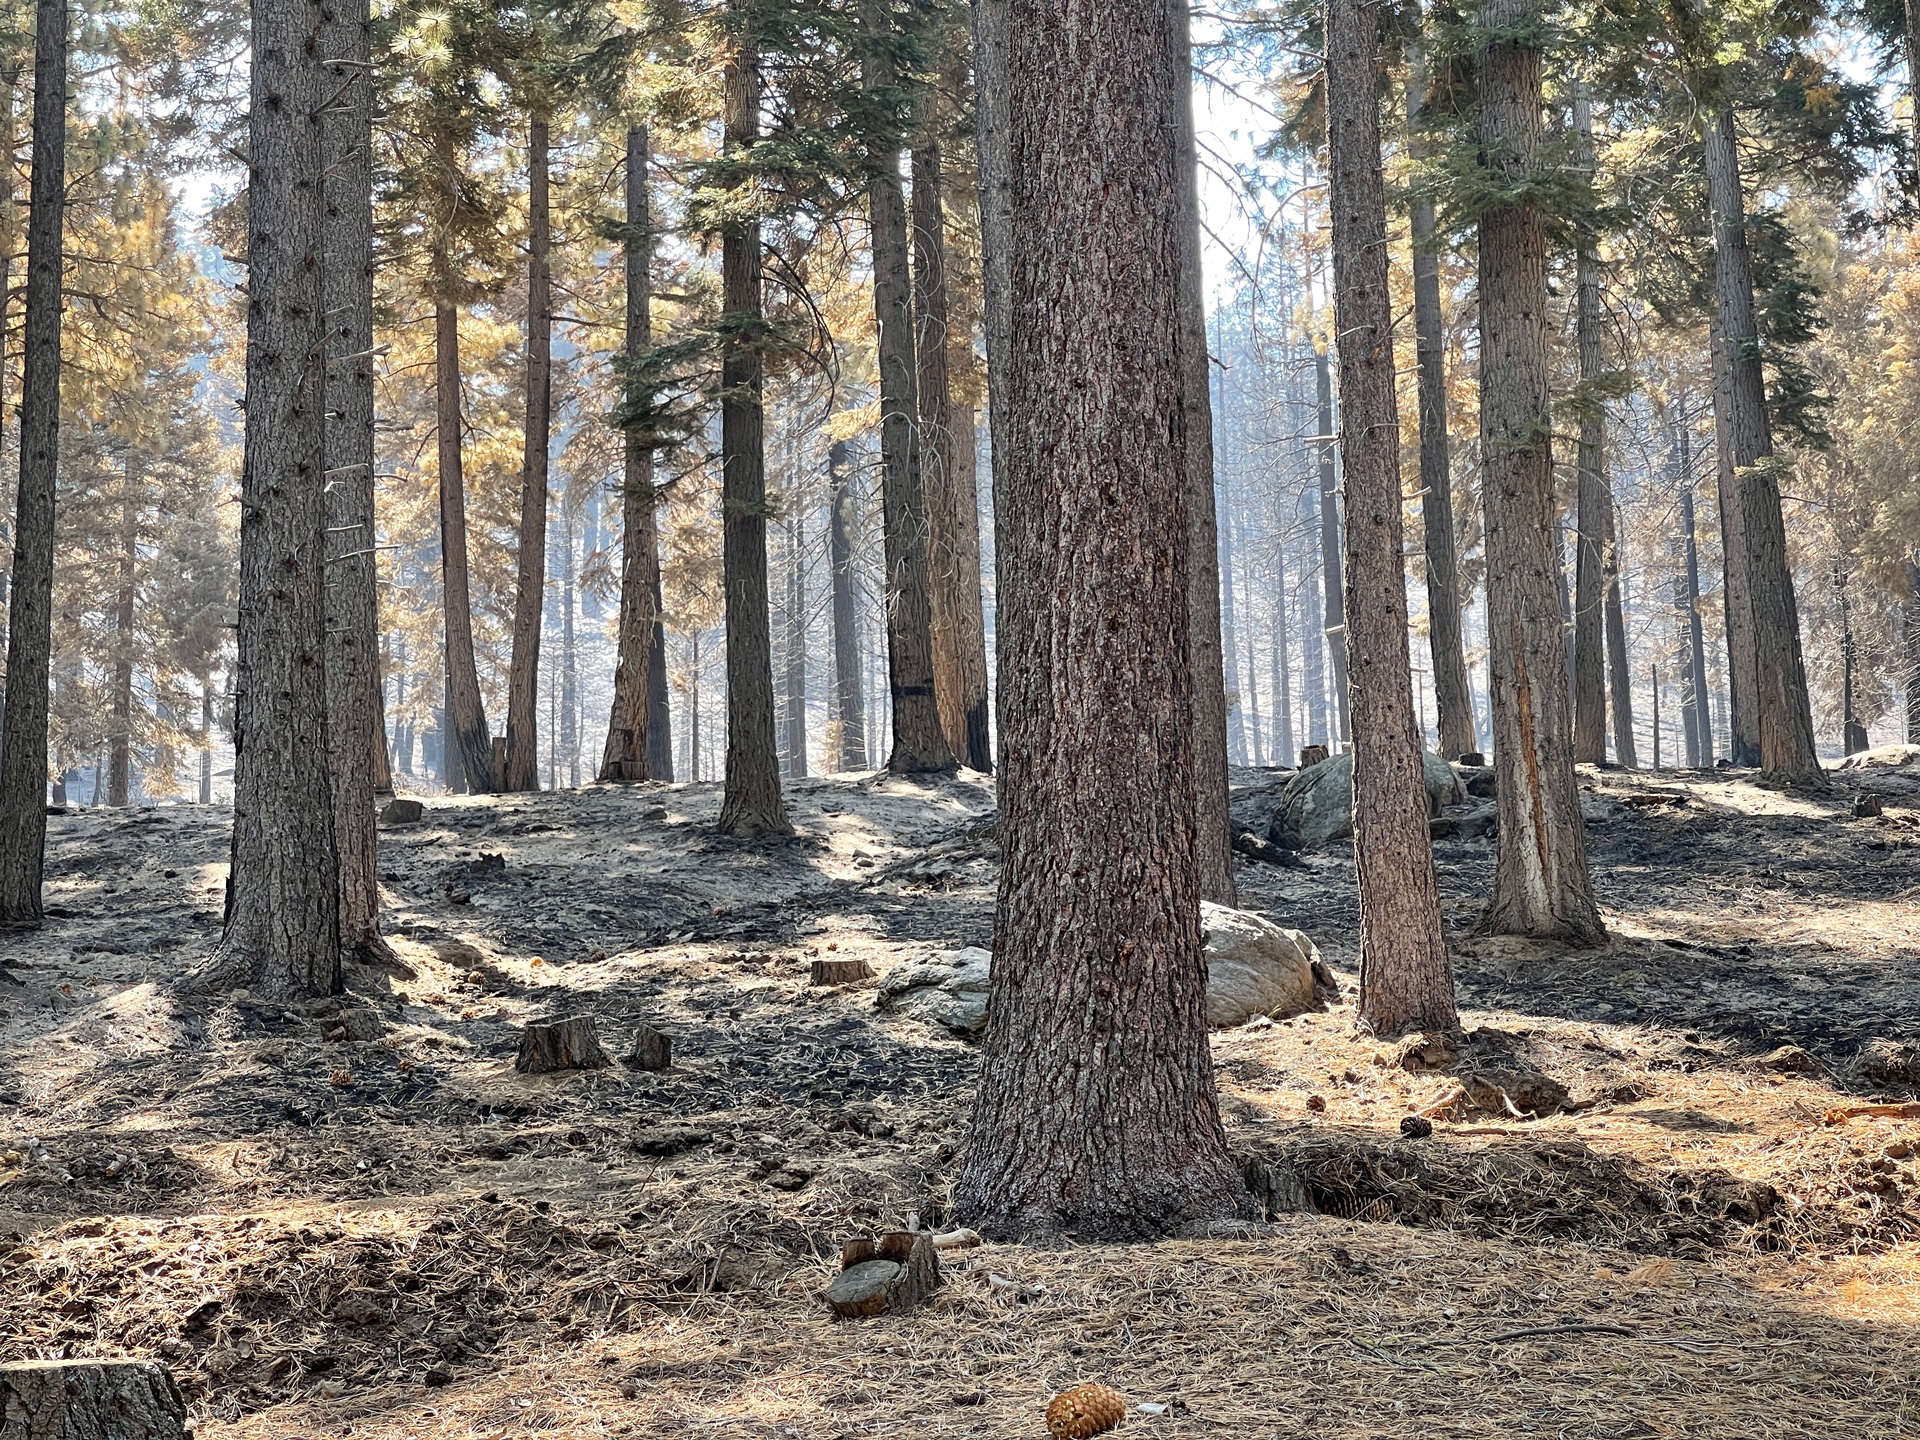 Forest after the Caldor Fire